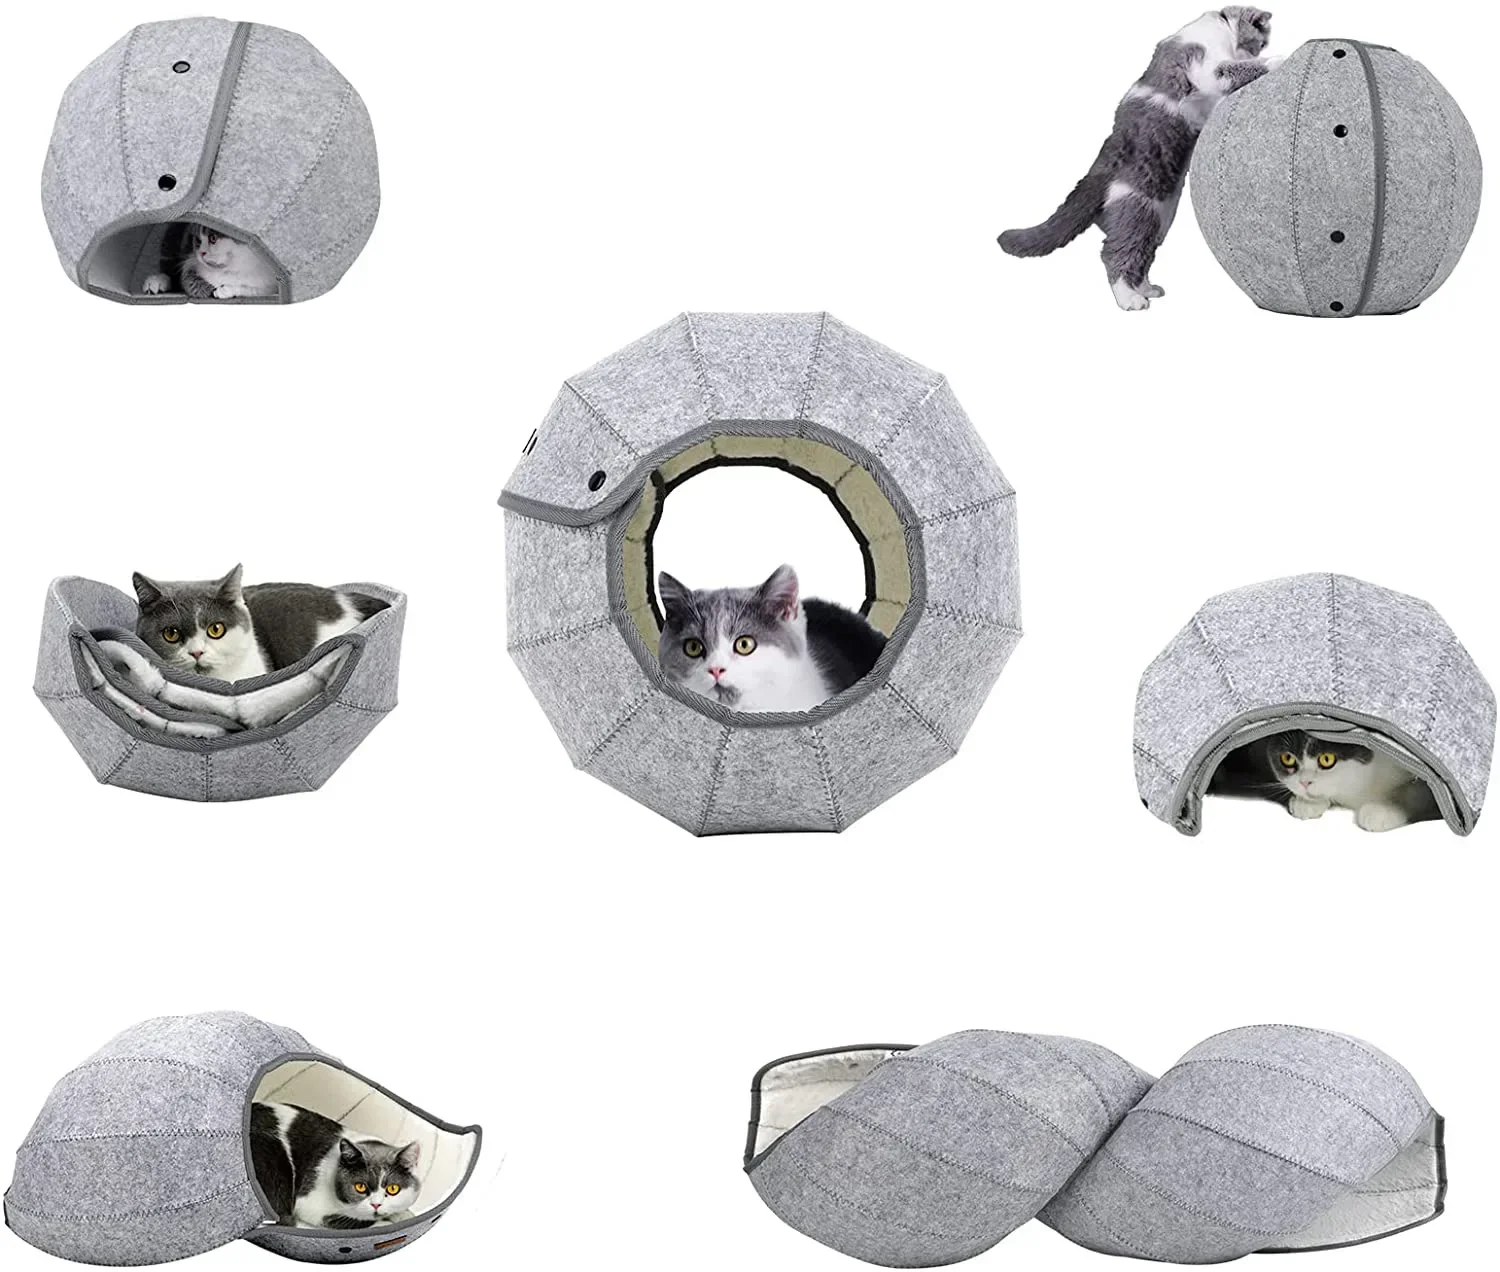 

Foldable breathable pet bed cat litter dog kennel cave tunnel semi-enclosed creative pet kennel cat mat cat and dog supplies